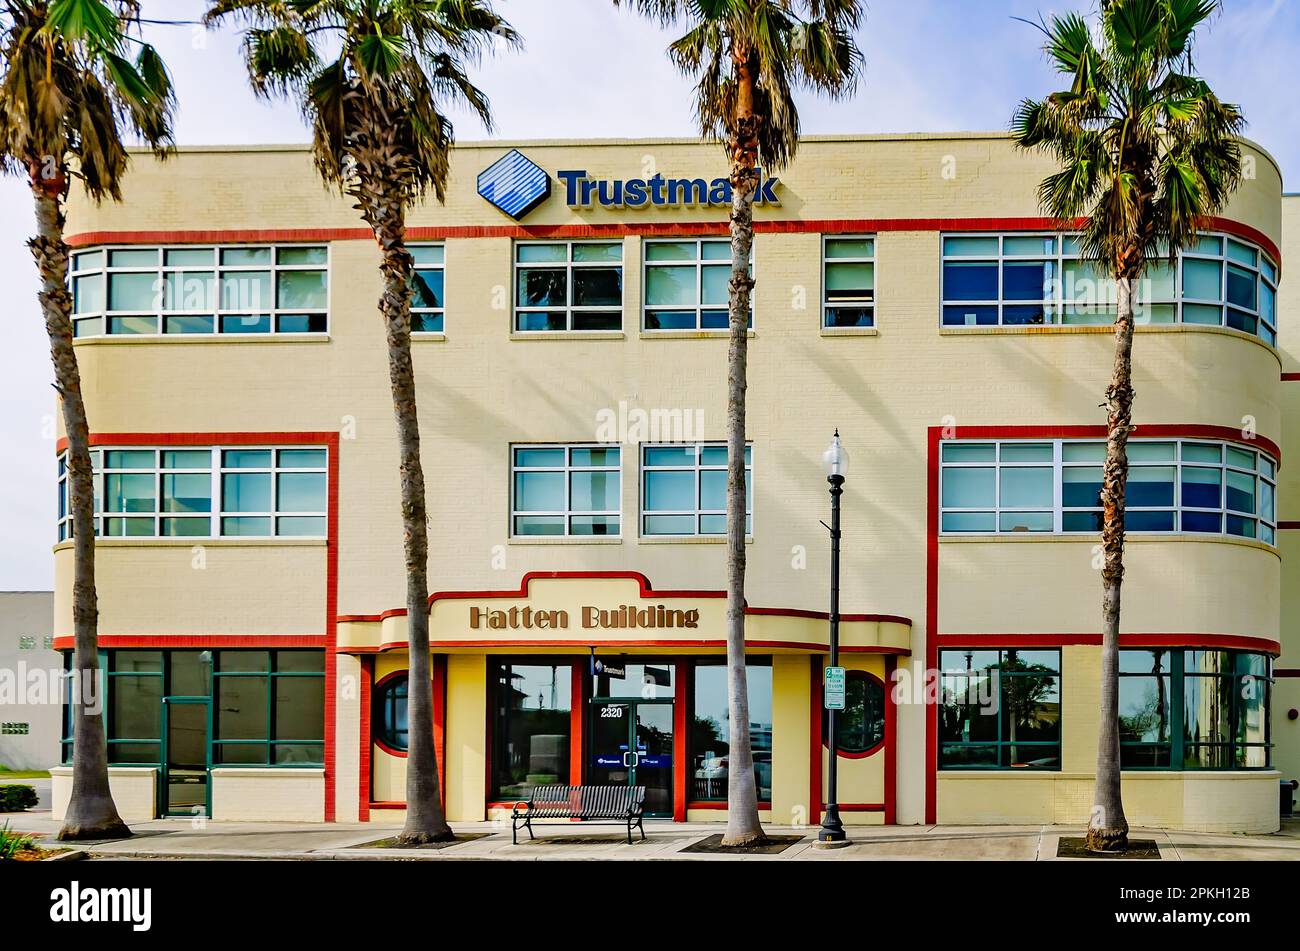 The Hatten Building is pictured, April 2, 2023, in Gulfport, Mississippi. Hatten Building was built in 1940 in the Art Moderne architectural style. Stock Photo